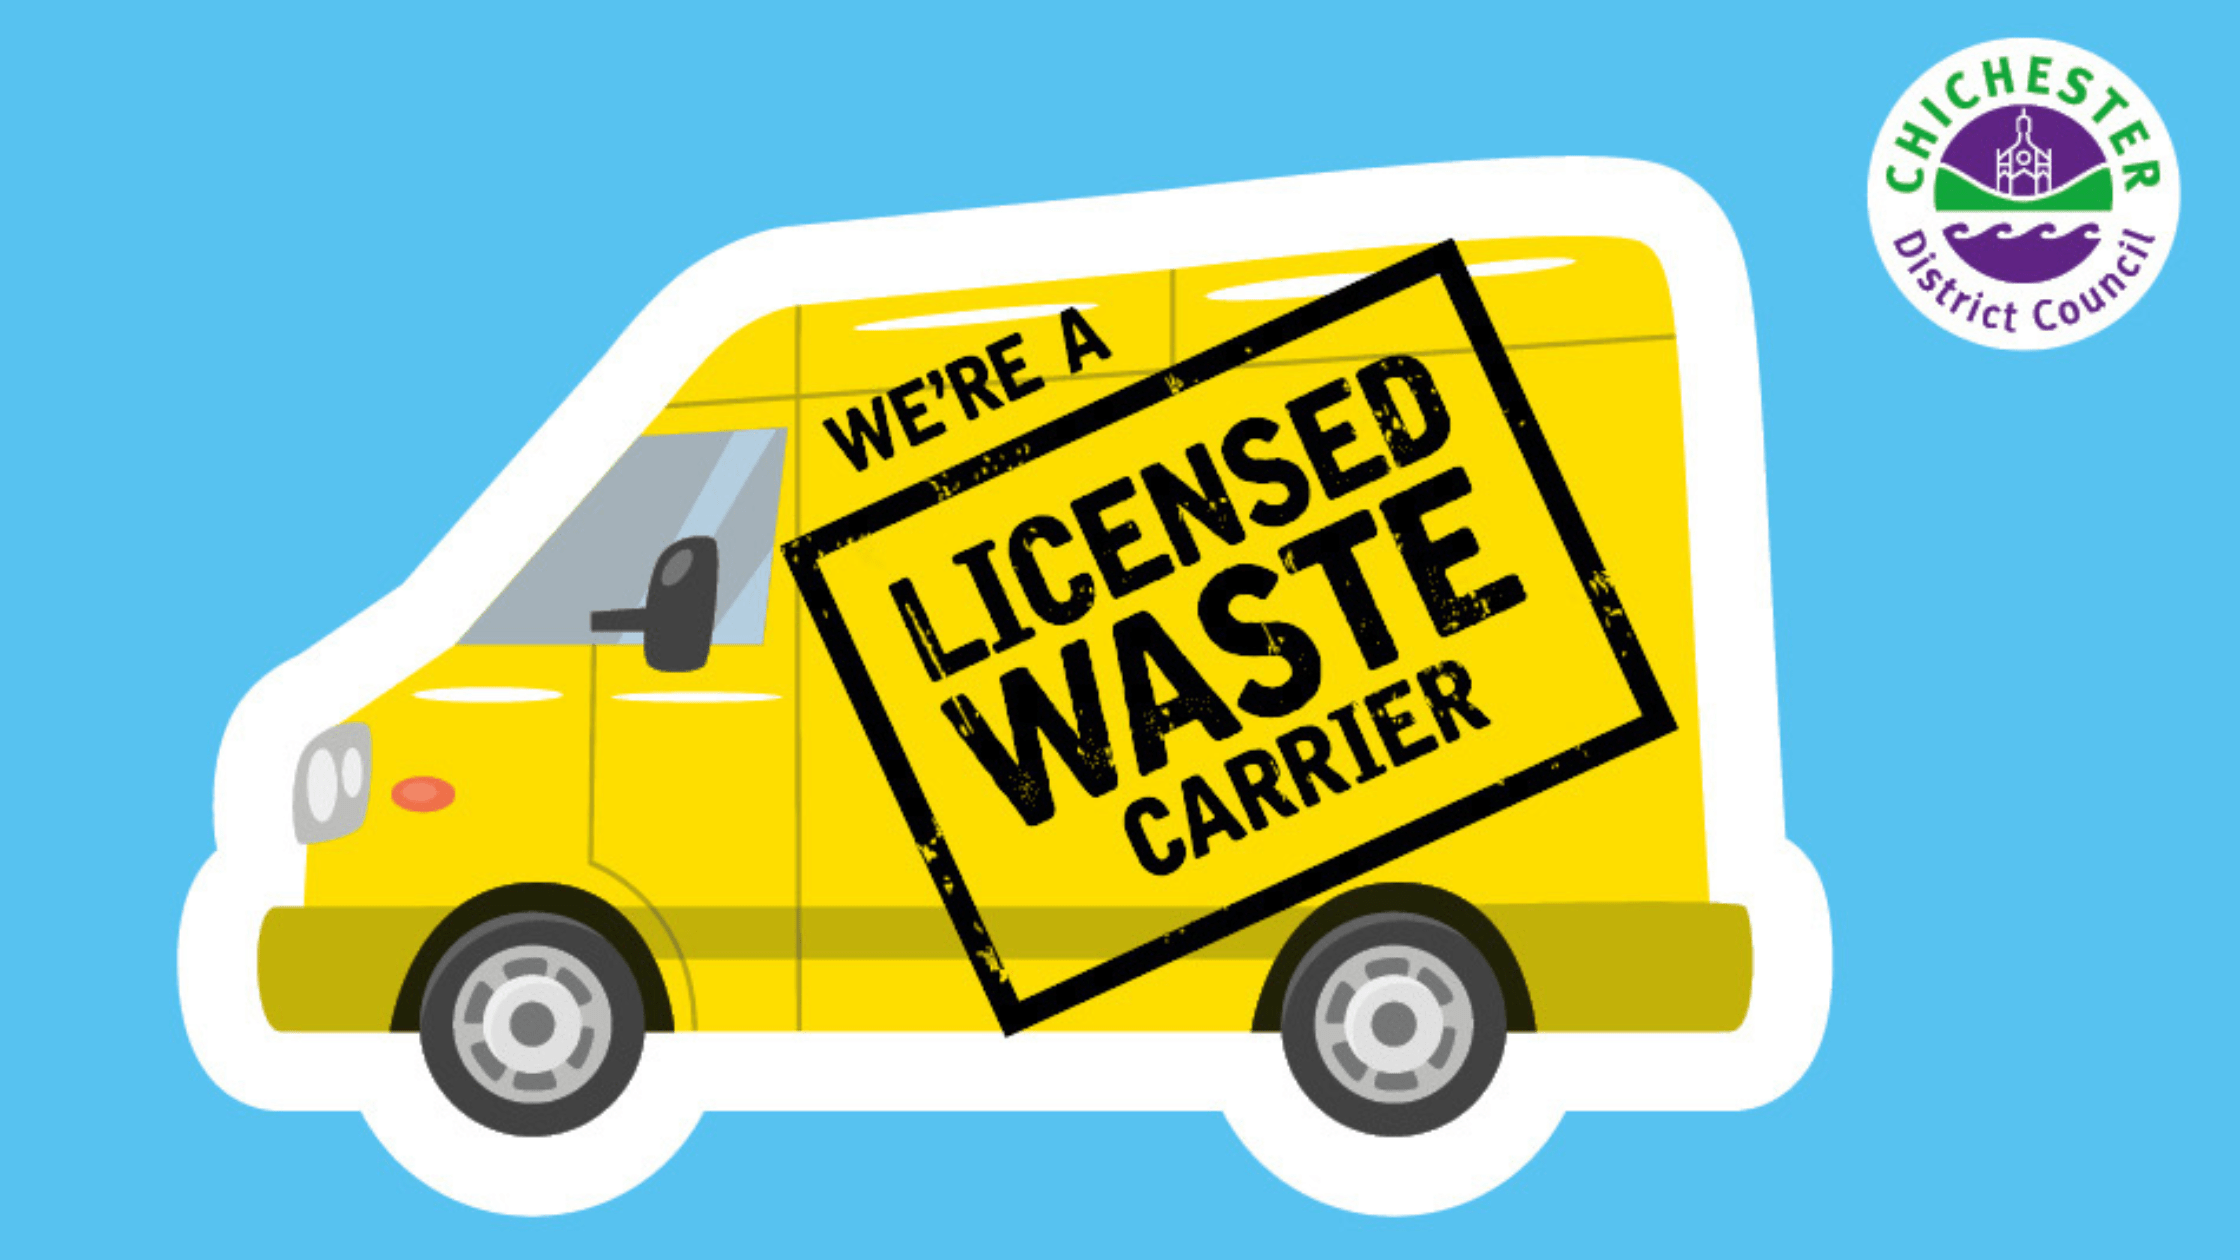 Chichester District Council Licenced Waste Carrier Licence logo resembles West Sussex crackdown on fly tipping